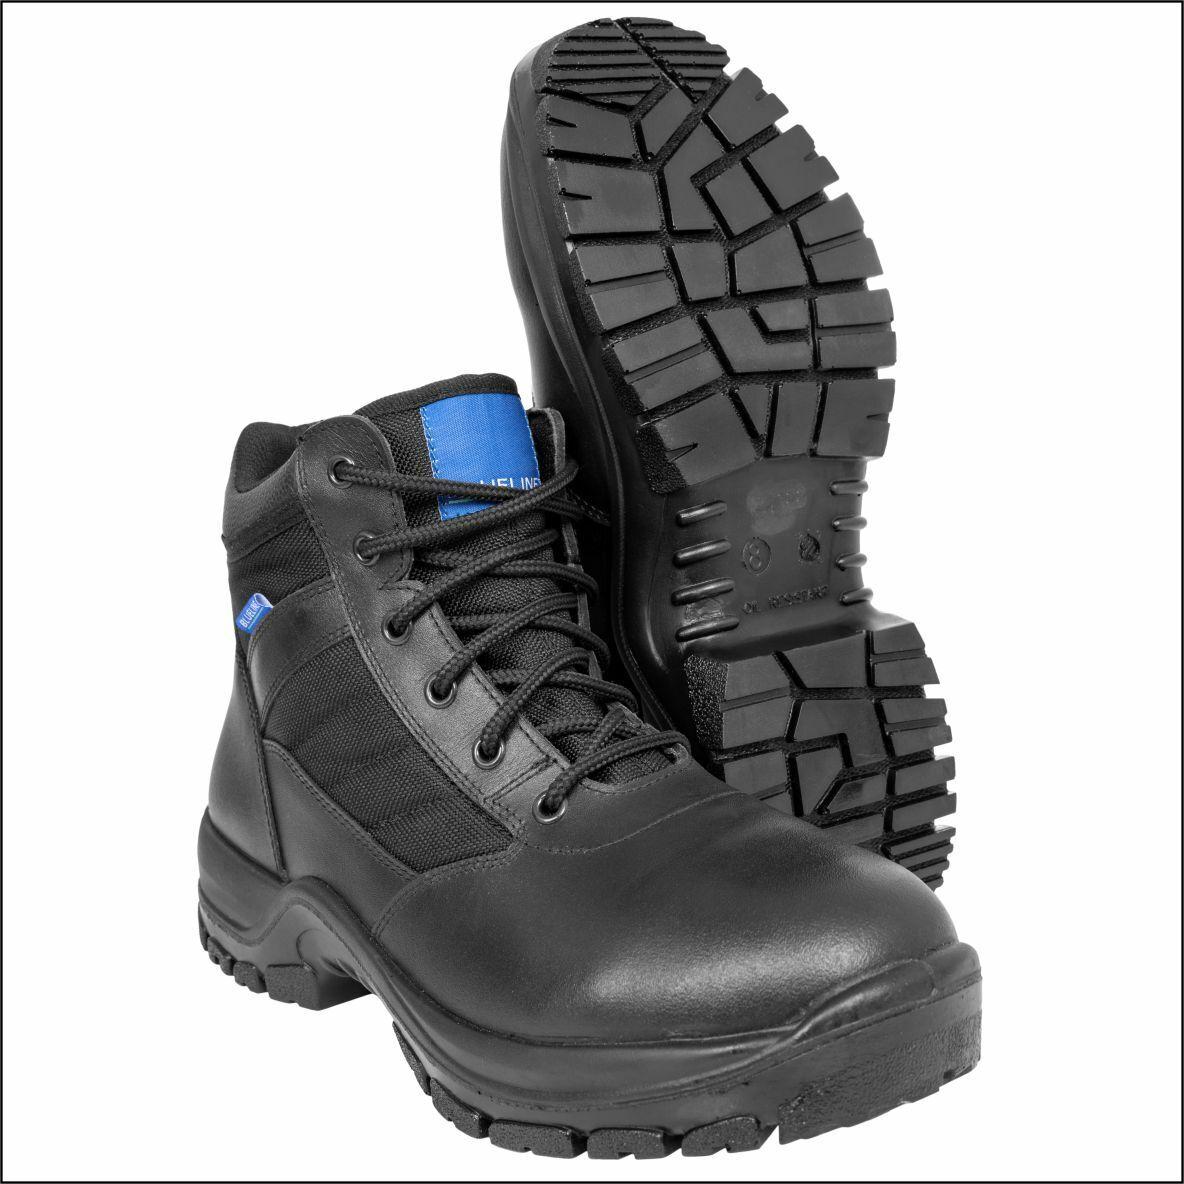 Patrol Boots | Police Boots